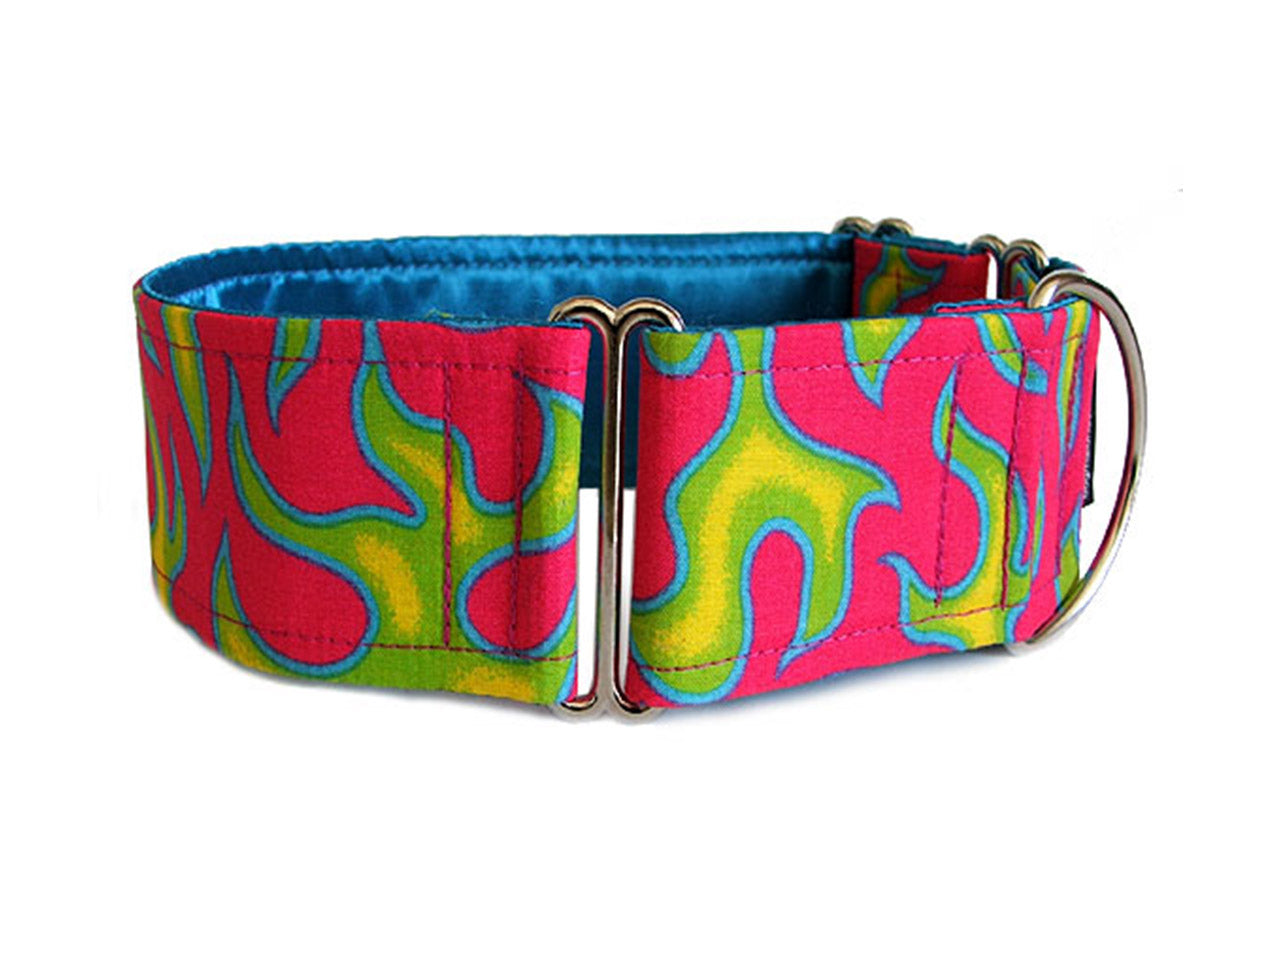 Sizzling green flames on super-hot pink are a hot accessory for your cool pup!